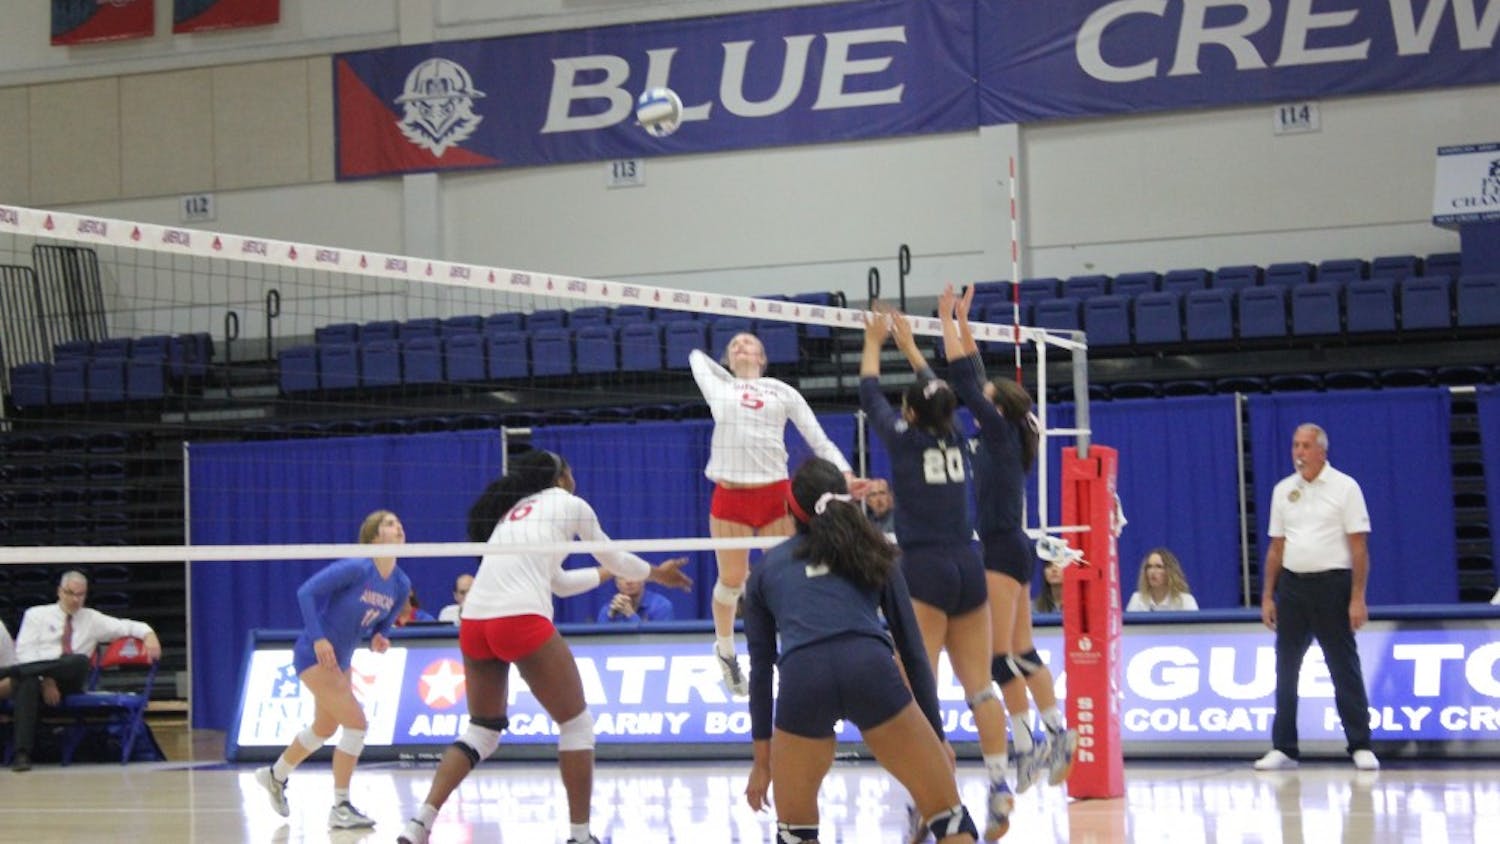 Freshman outside hitter Shannon Webb goes up for a kill against Navy in the Patriot League Tournament semifinal Nov. 19.